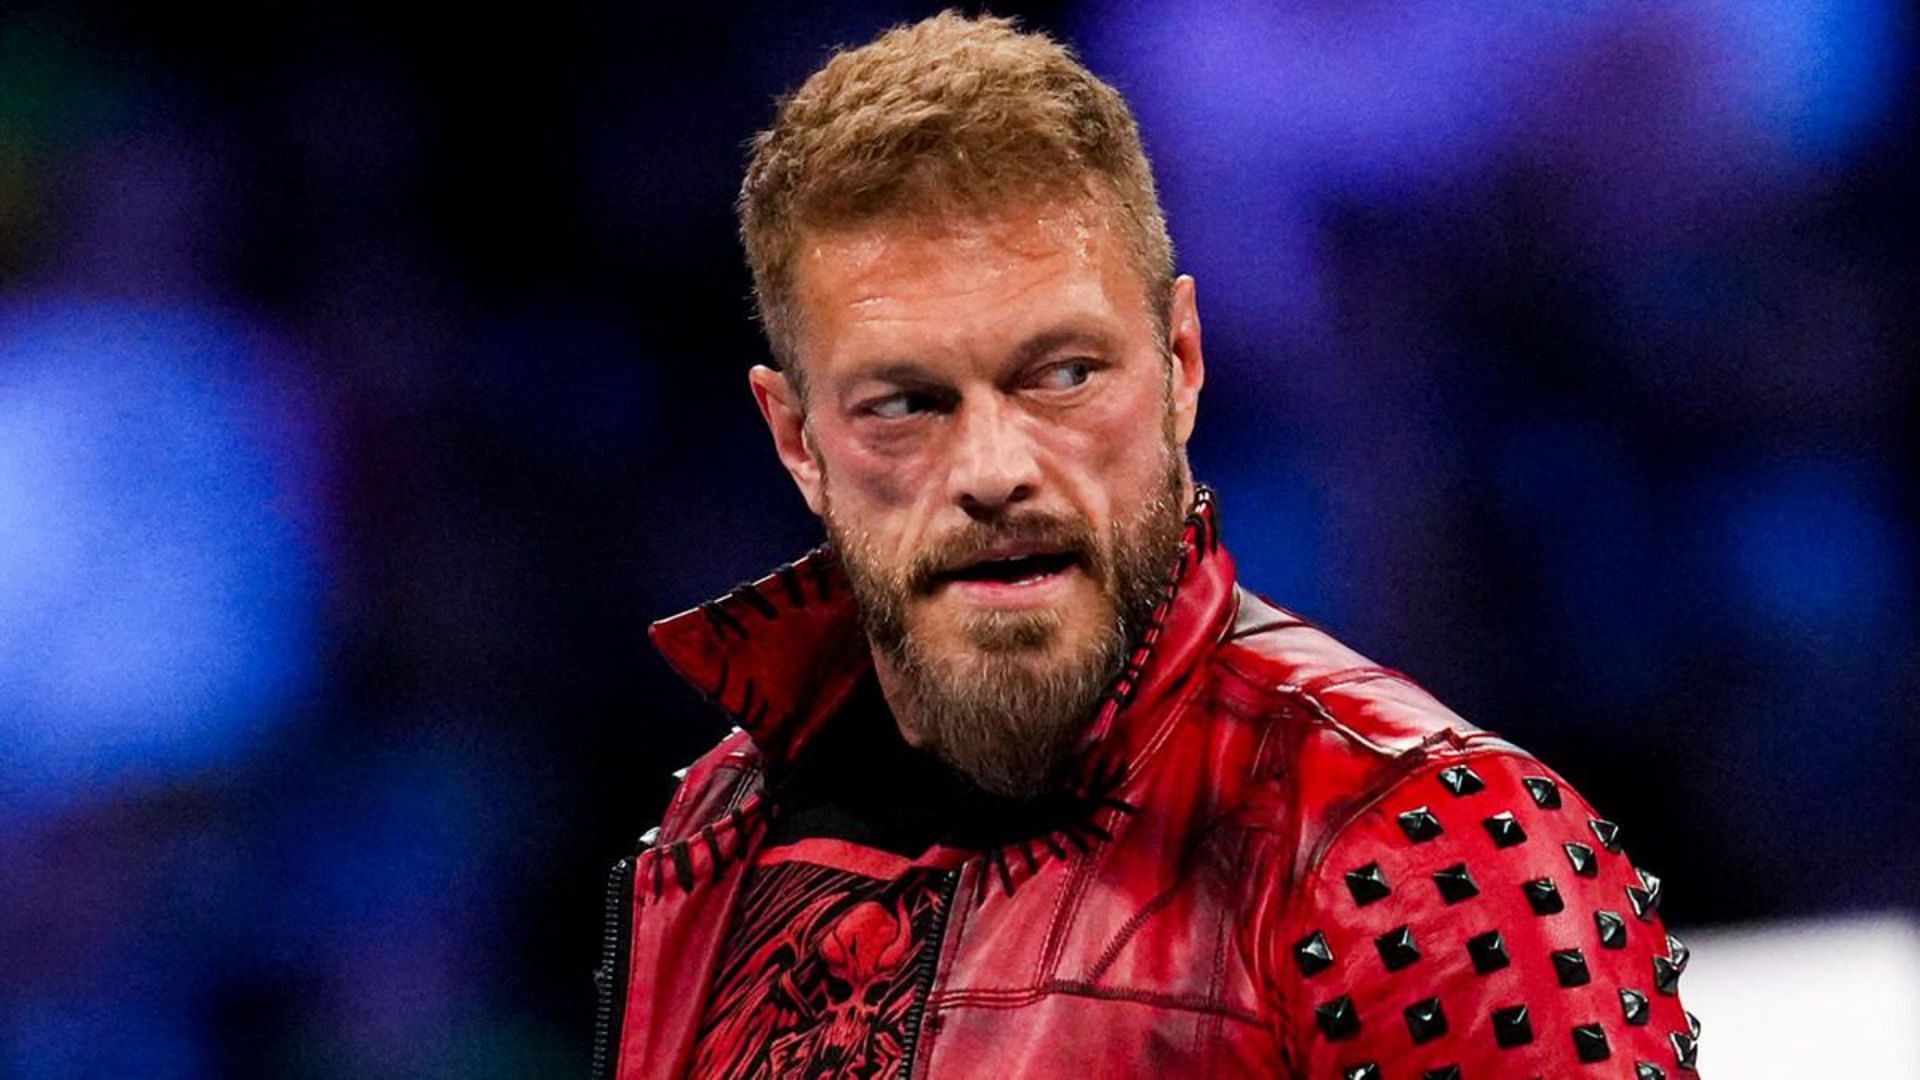 Edge vowed to destroy The Judgment Day